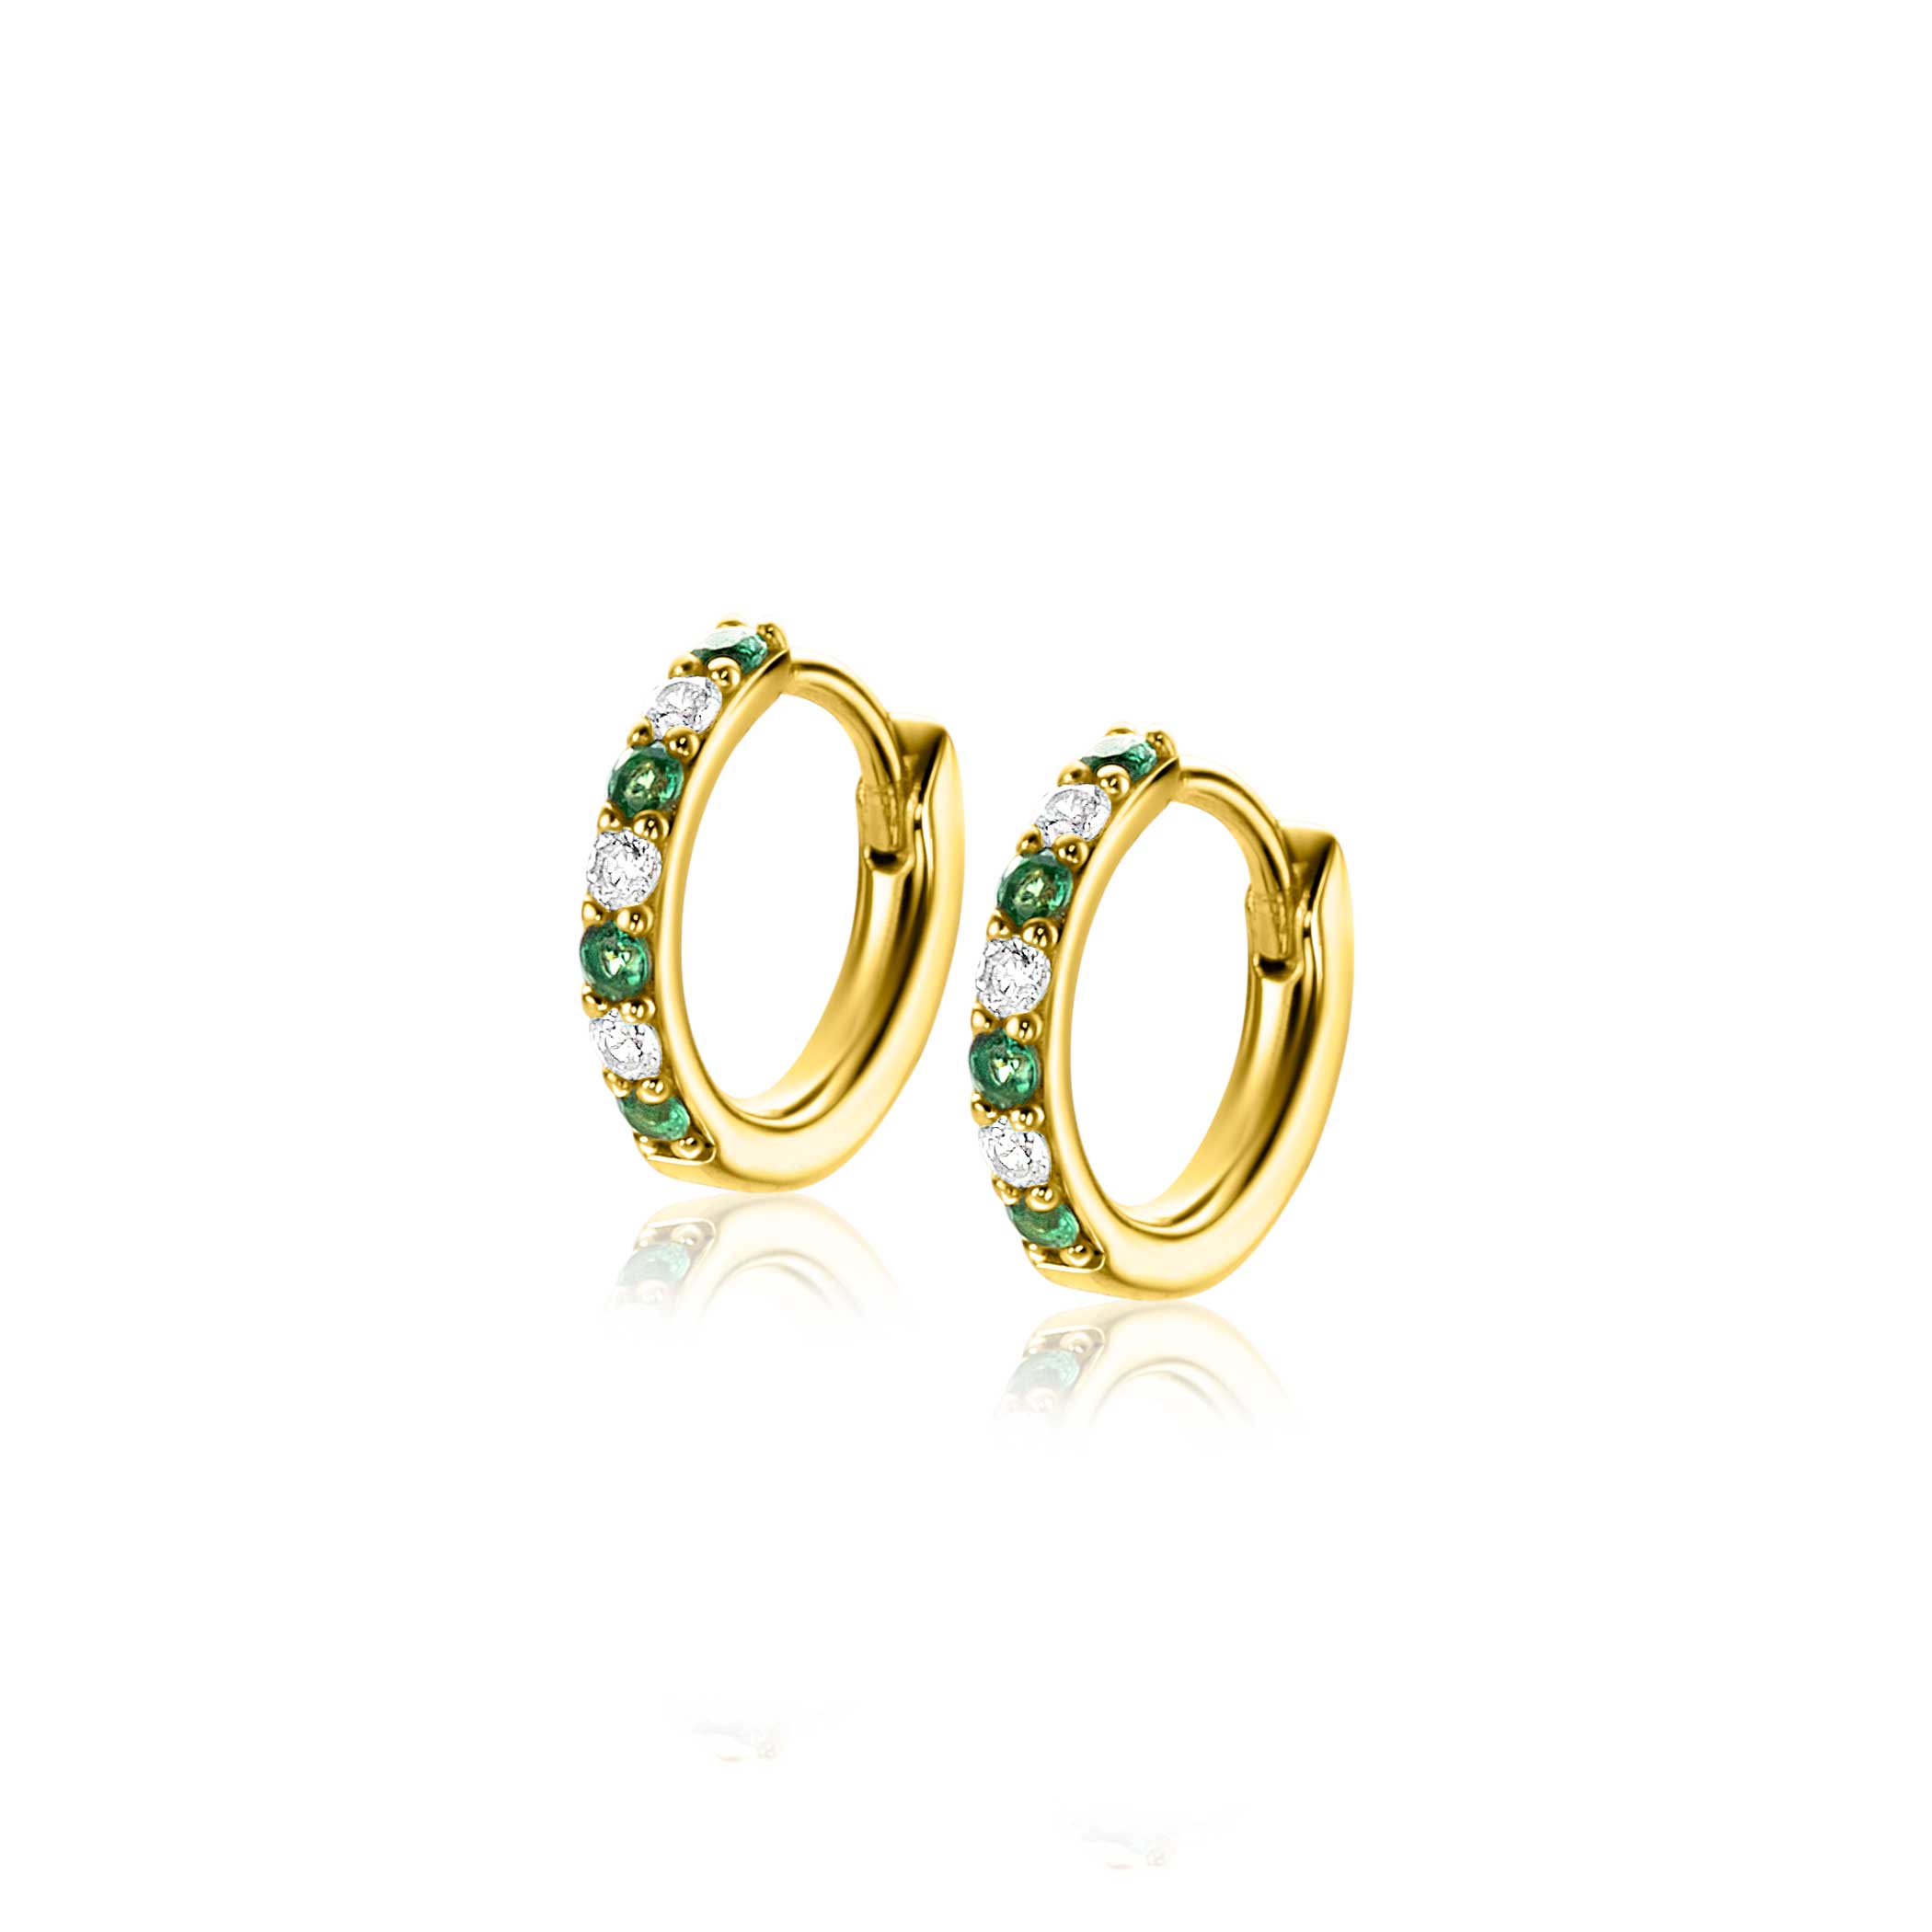 12mm ZINZI Gold Plated Sterling Silver Hoop Earrings Round White Zirconias and Green Color Stones width tube 2mm ZIO2557